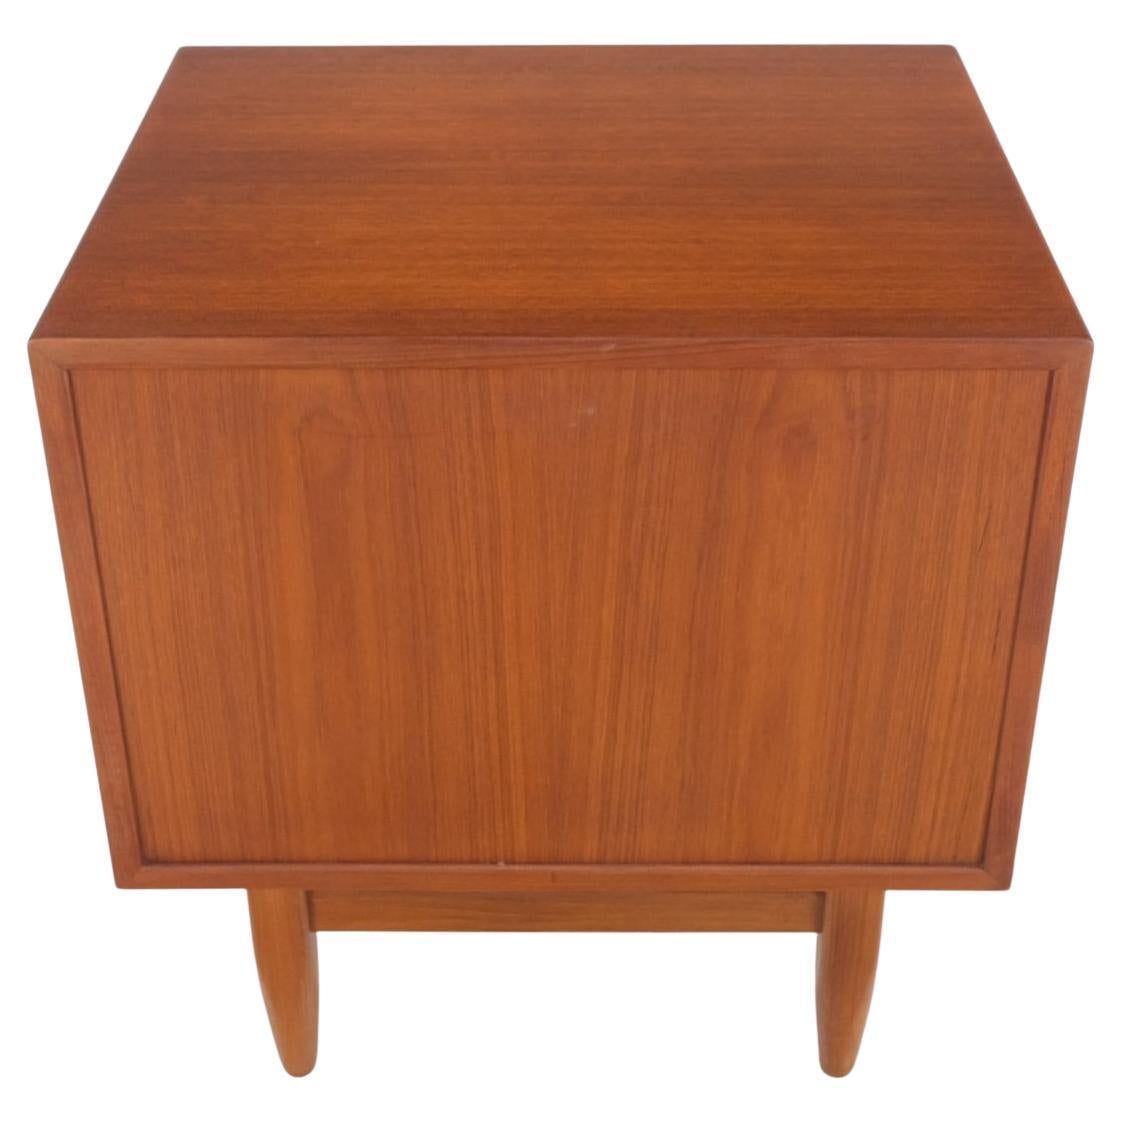 Danish Mid-Century Modern Teak Side End Table Night Stand Tambour Doors Falster For Sale 5